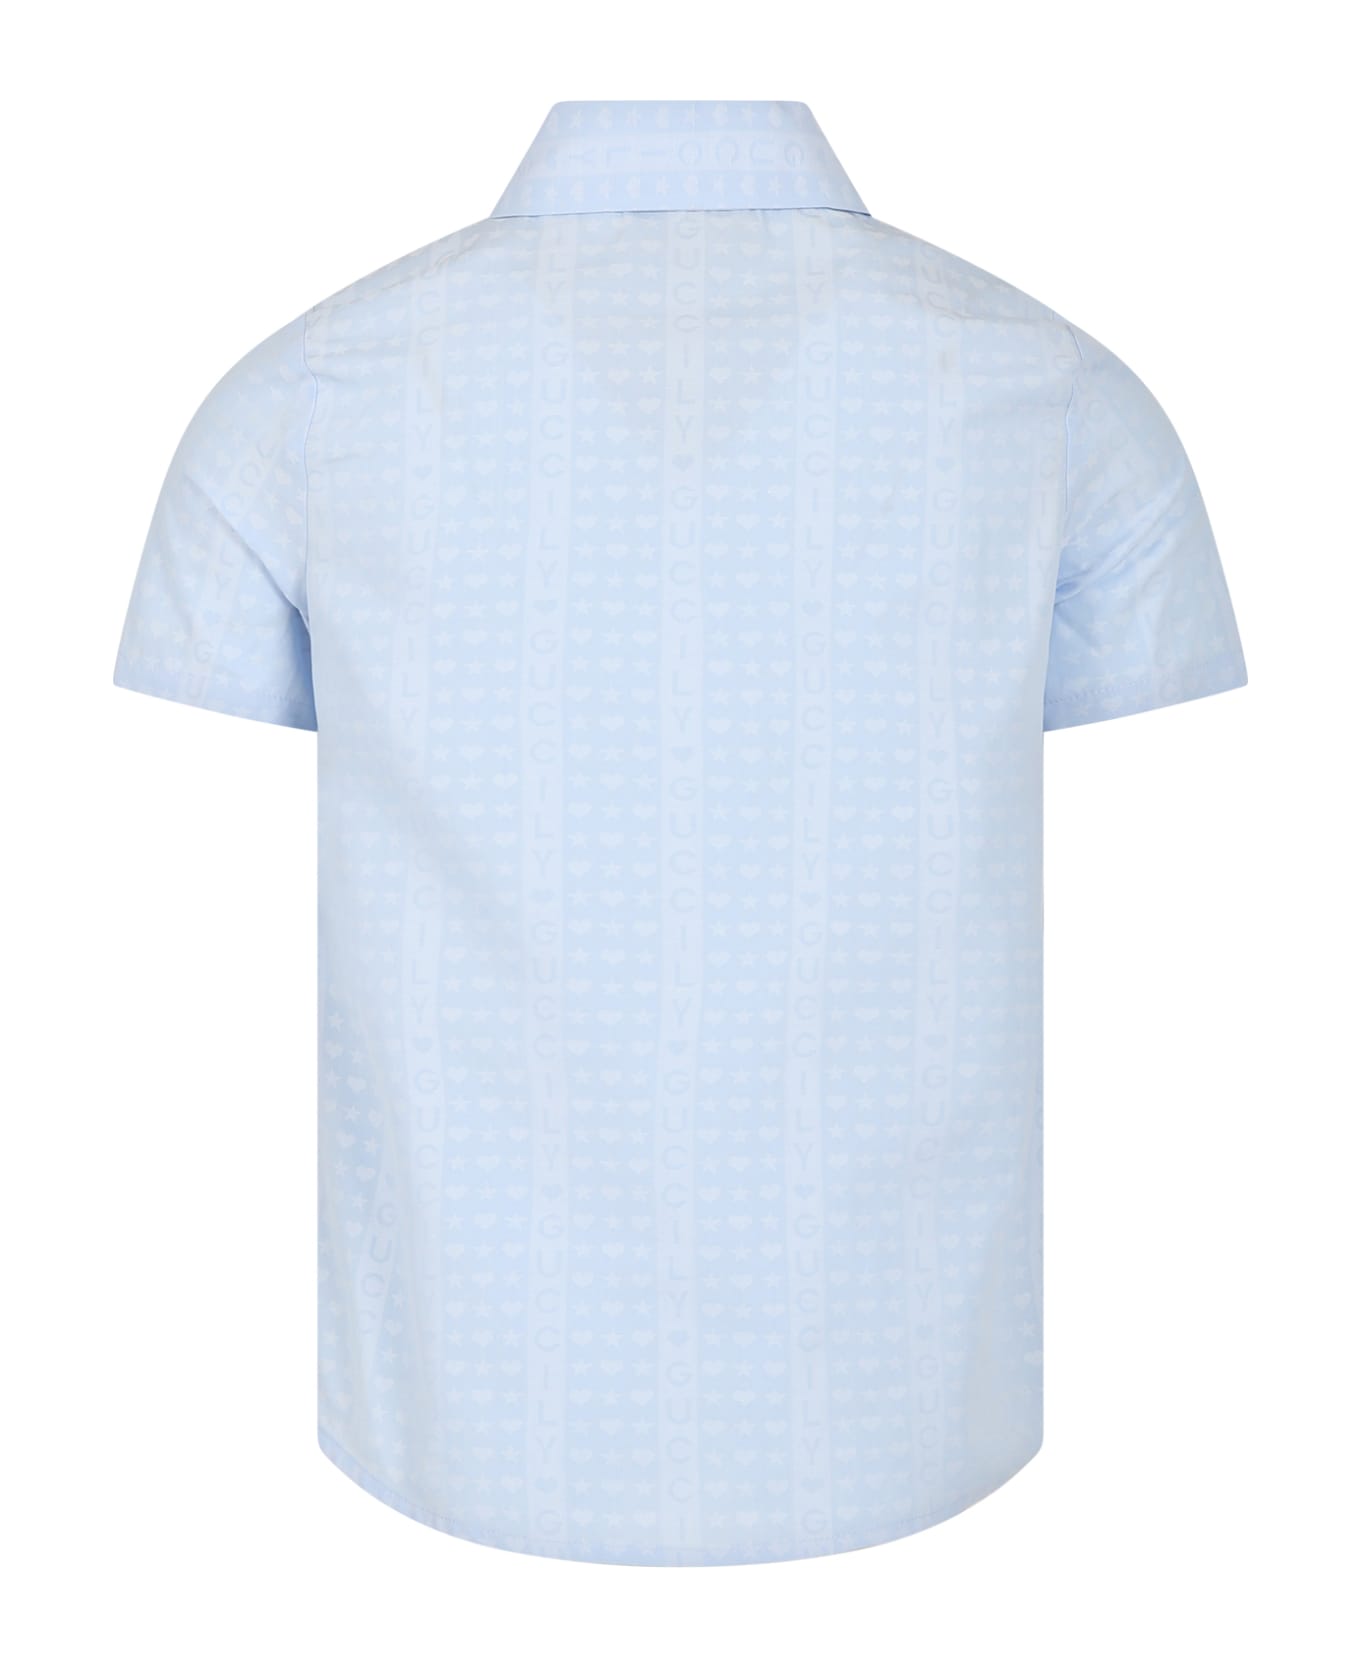 Gucci Light Blue Shirt For Girl With "guccily" Writing - Light Blue